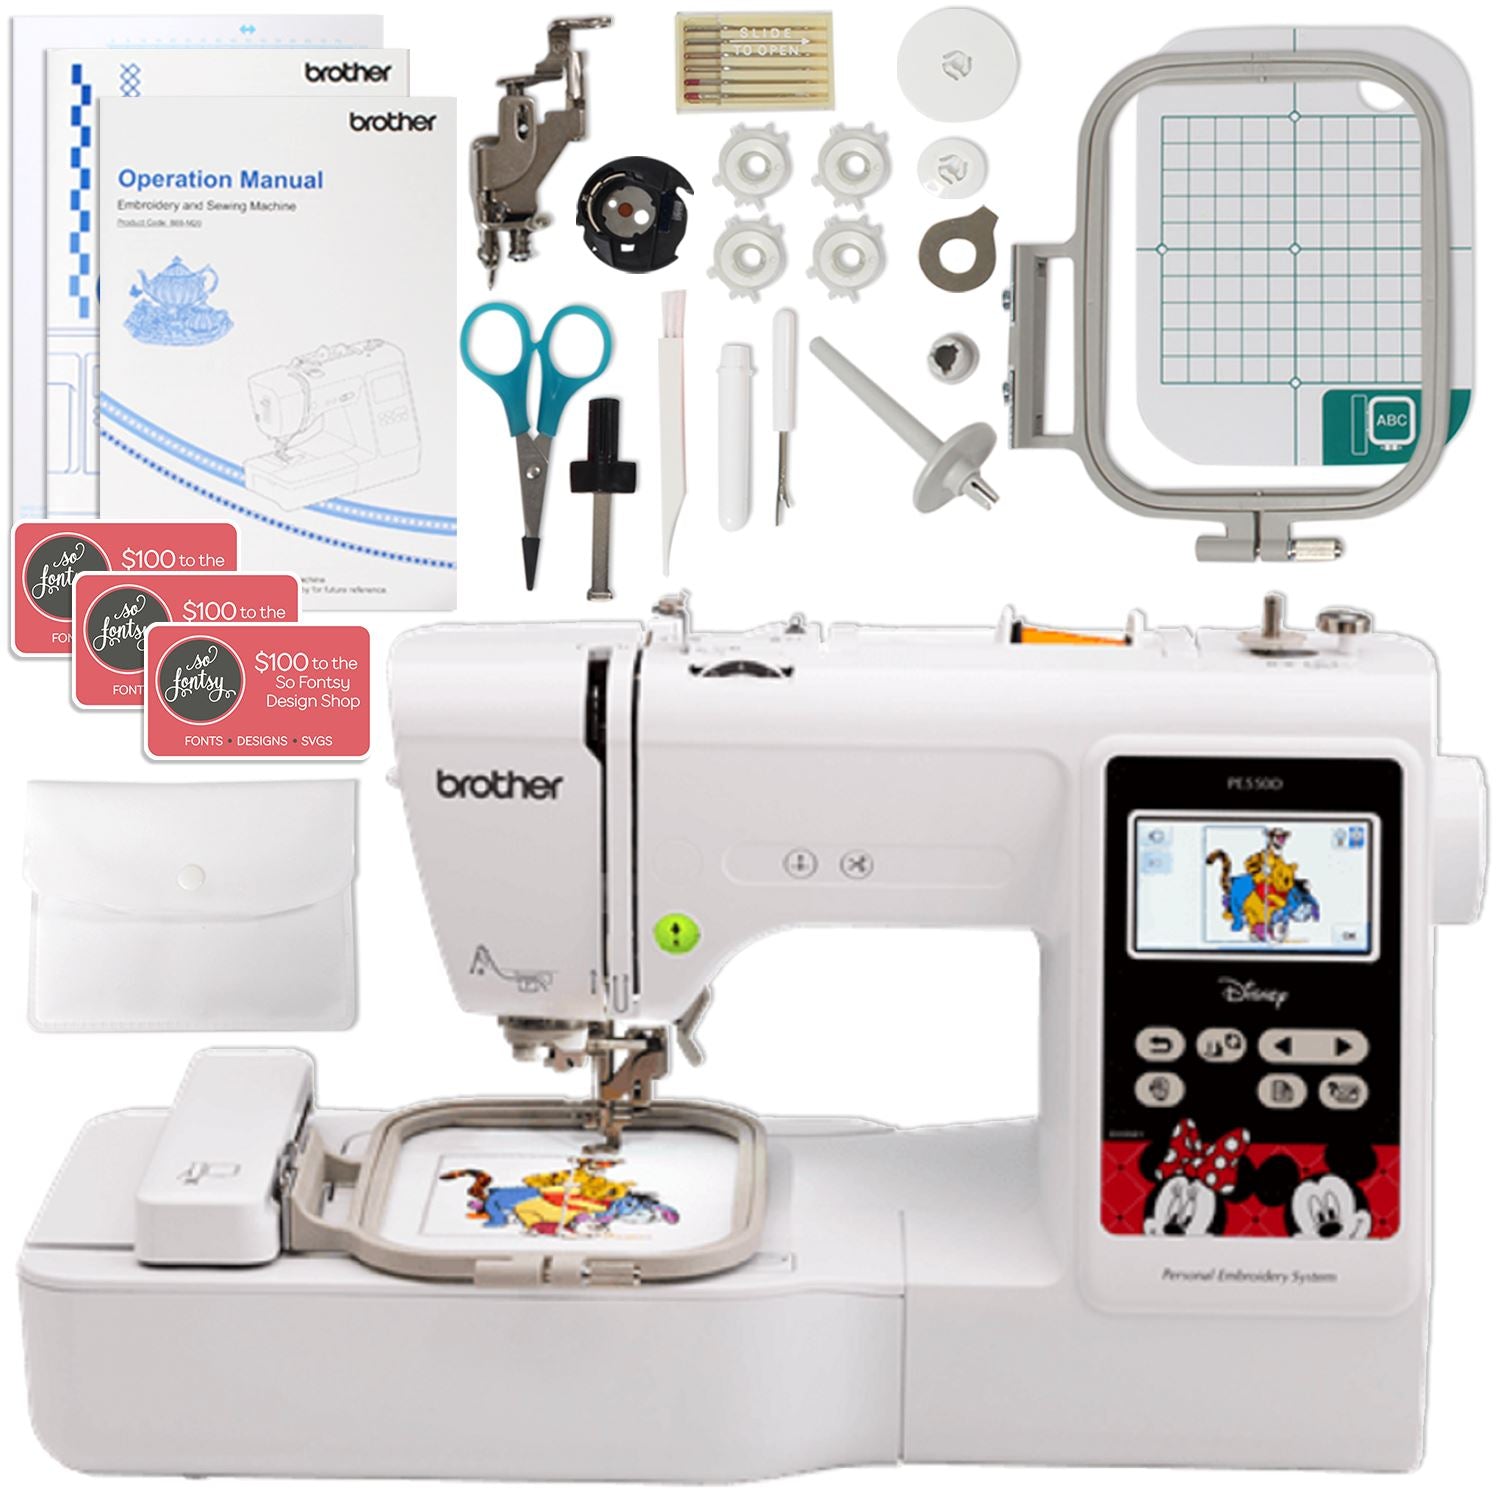 Brother SE700 Sewing & 4x4 Embroidery Machine Bundles– Swing Design